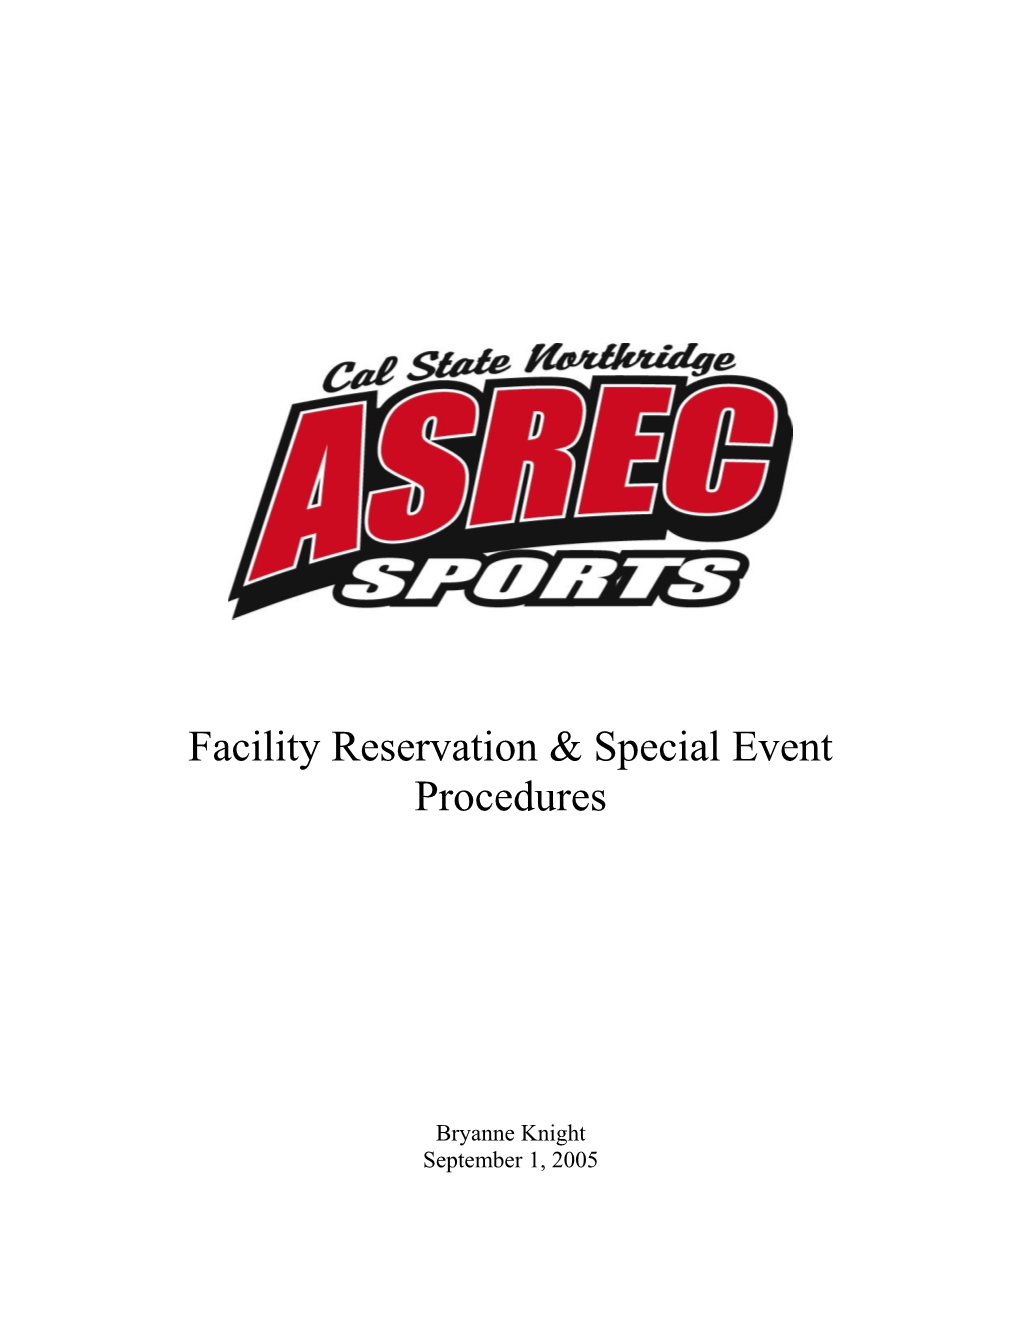 Facility Reservation & Special Event Procedures